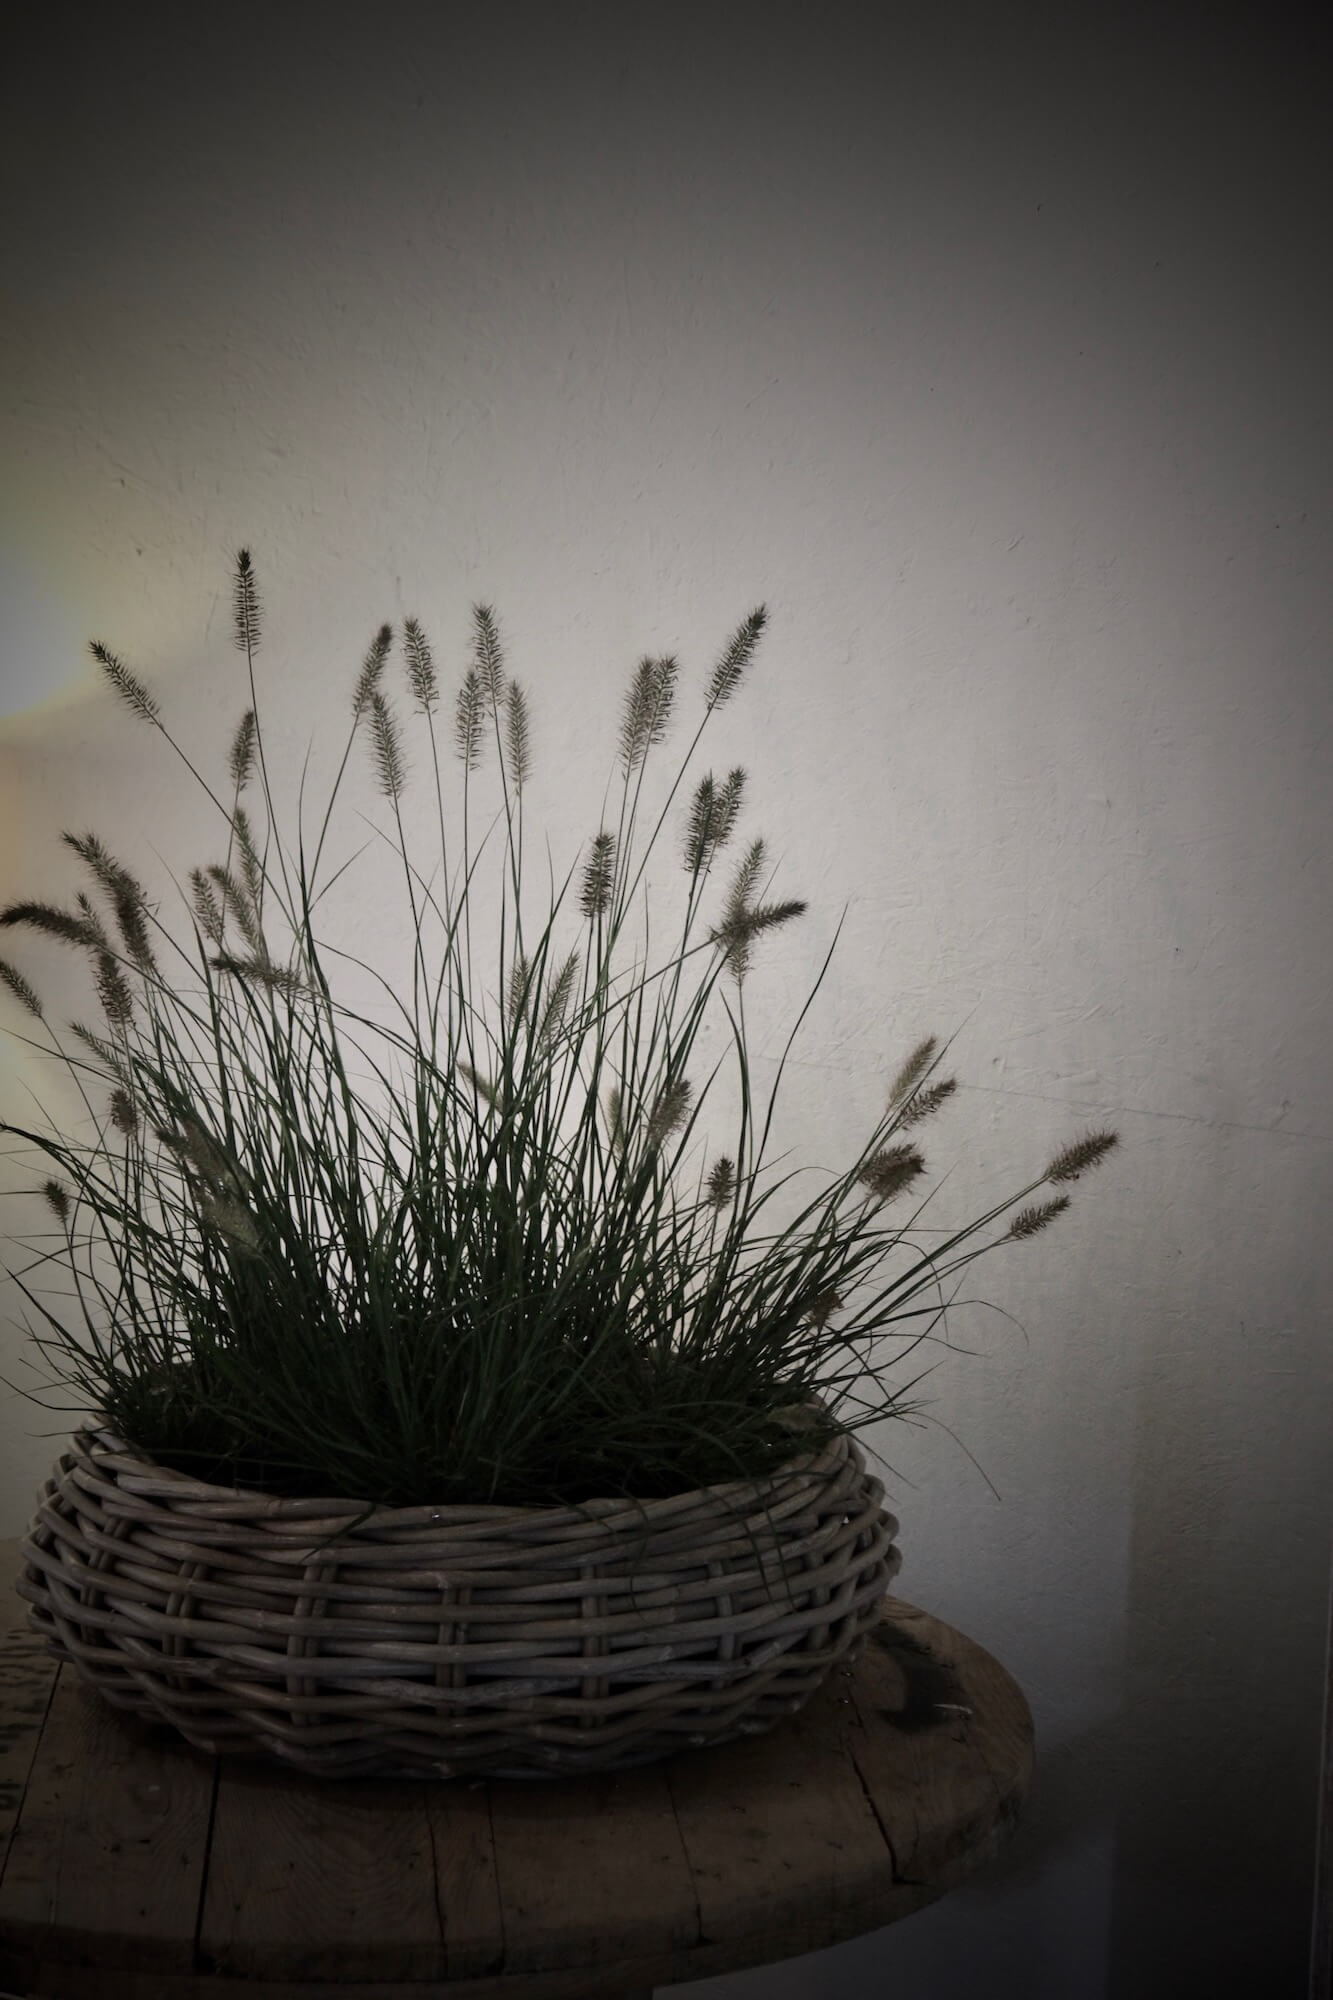 ornamental grasses in a basket in a white candlelit room